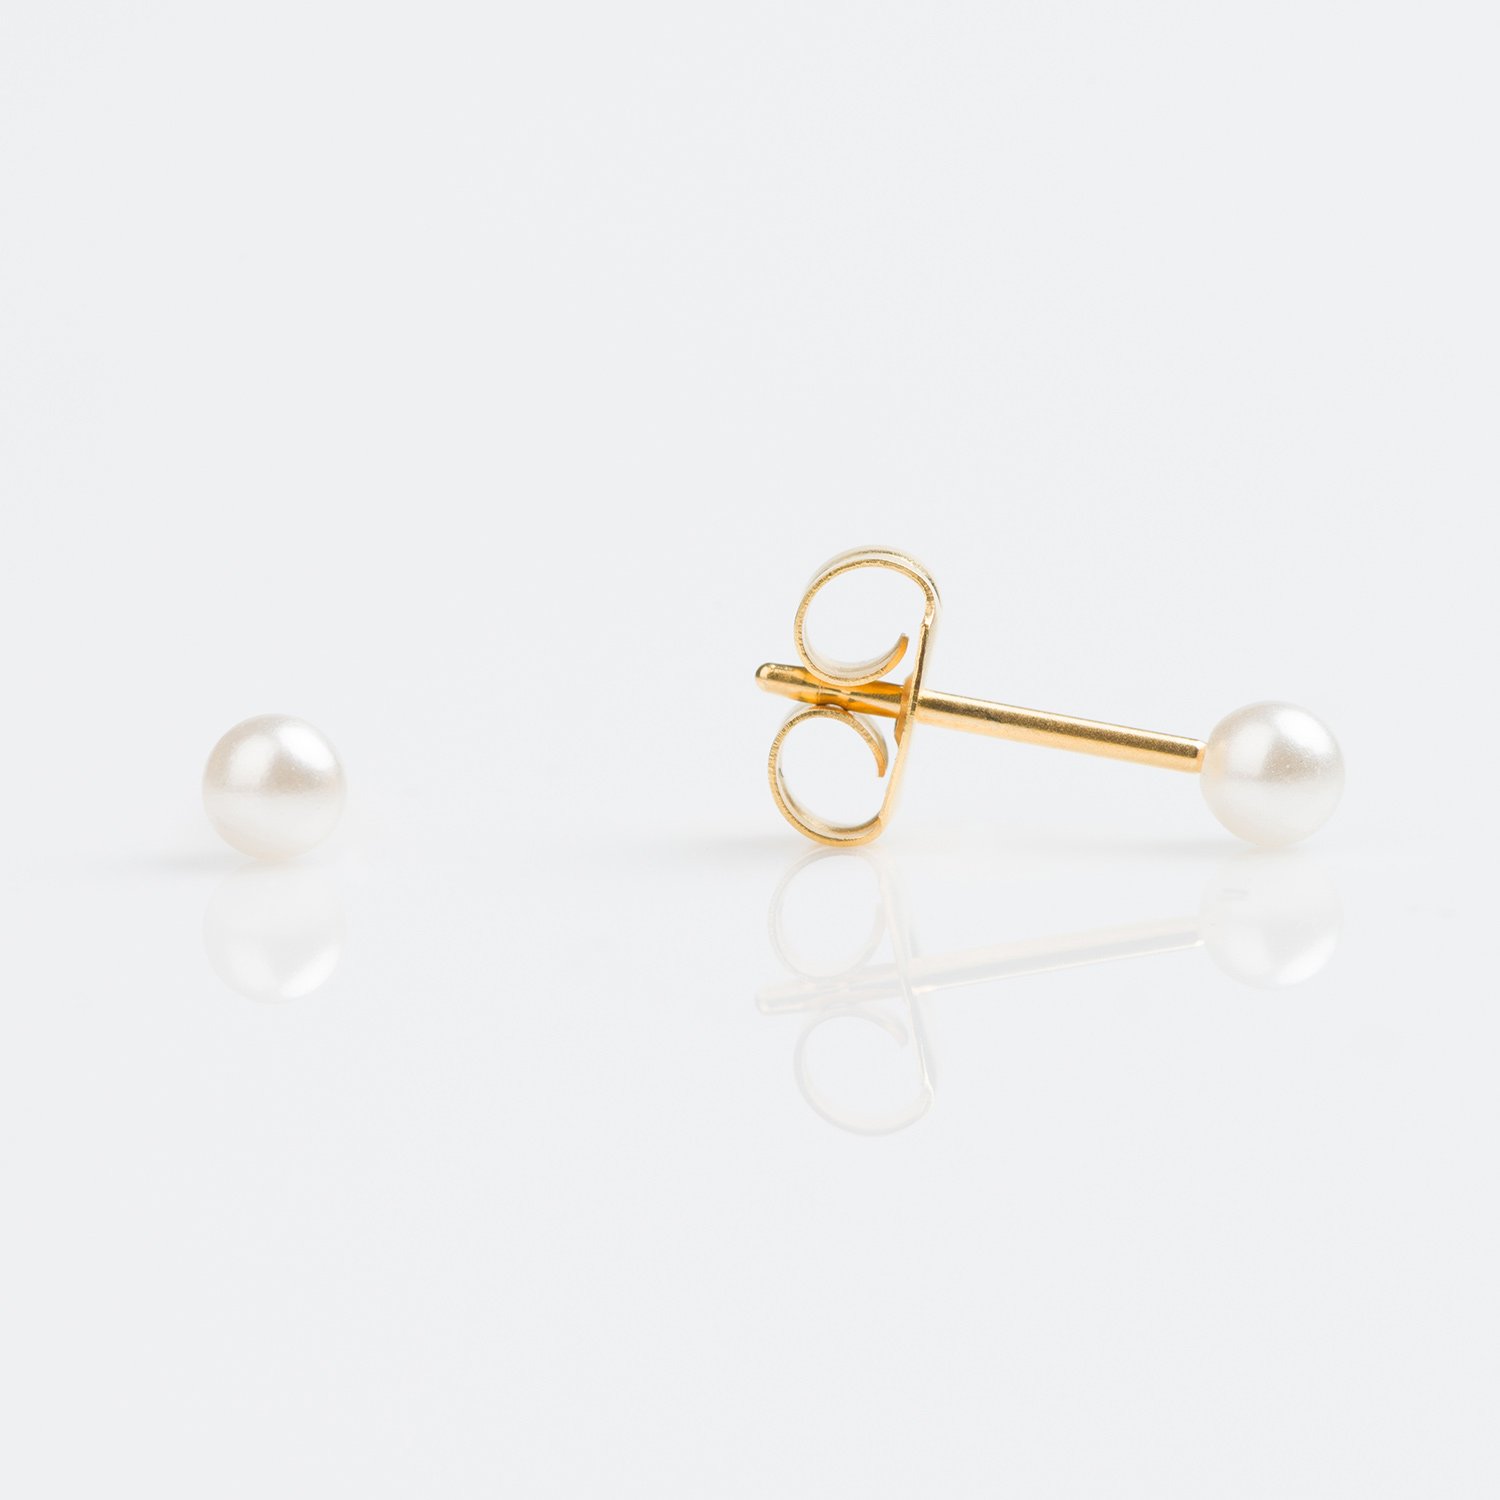 S673STX – Studex Gold Plated 3mm White Pearl Earrings